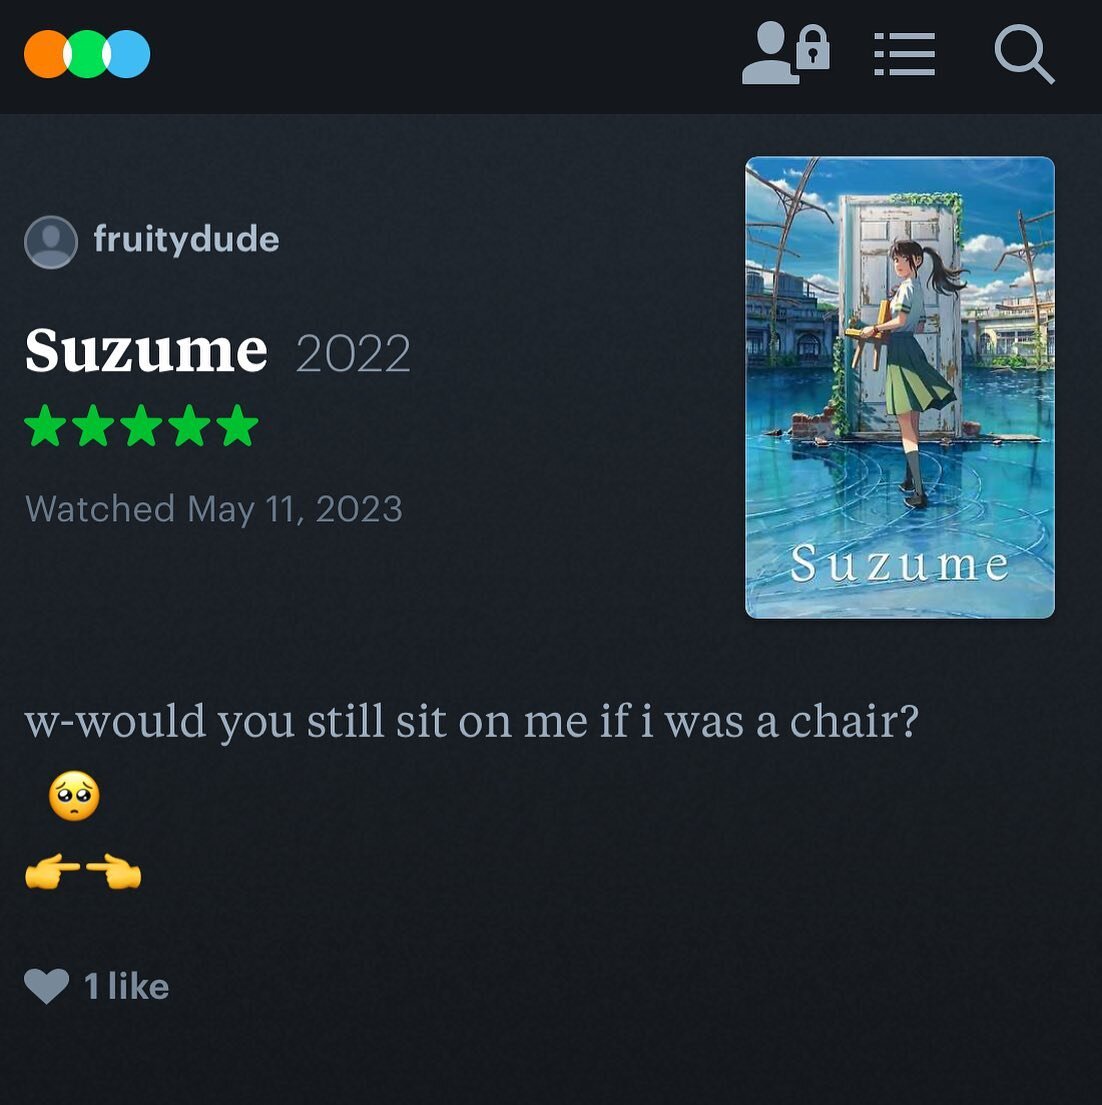 I'm team sit

I've danced with a chair, talked to a chair, written dialogue between chairs, do you really think I wouldn't sit? I'm gonna sit! Four legs, Five Stars. 
.
.
.
#fivestarfriday #fivestars #fivestarreview #funnyreviews #letterboxd #letterb